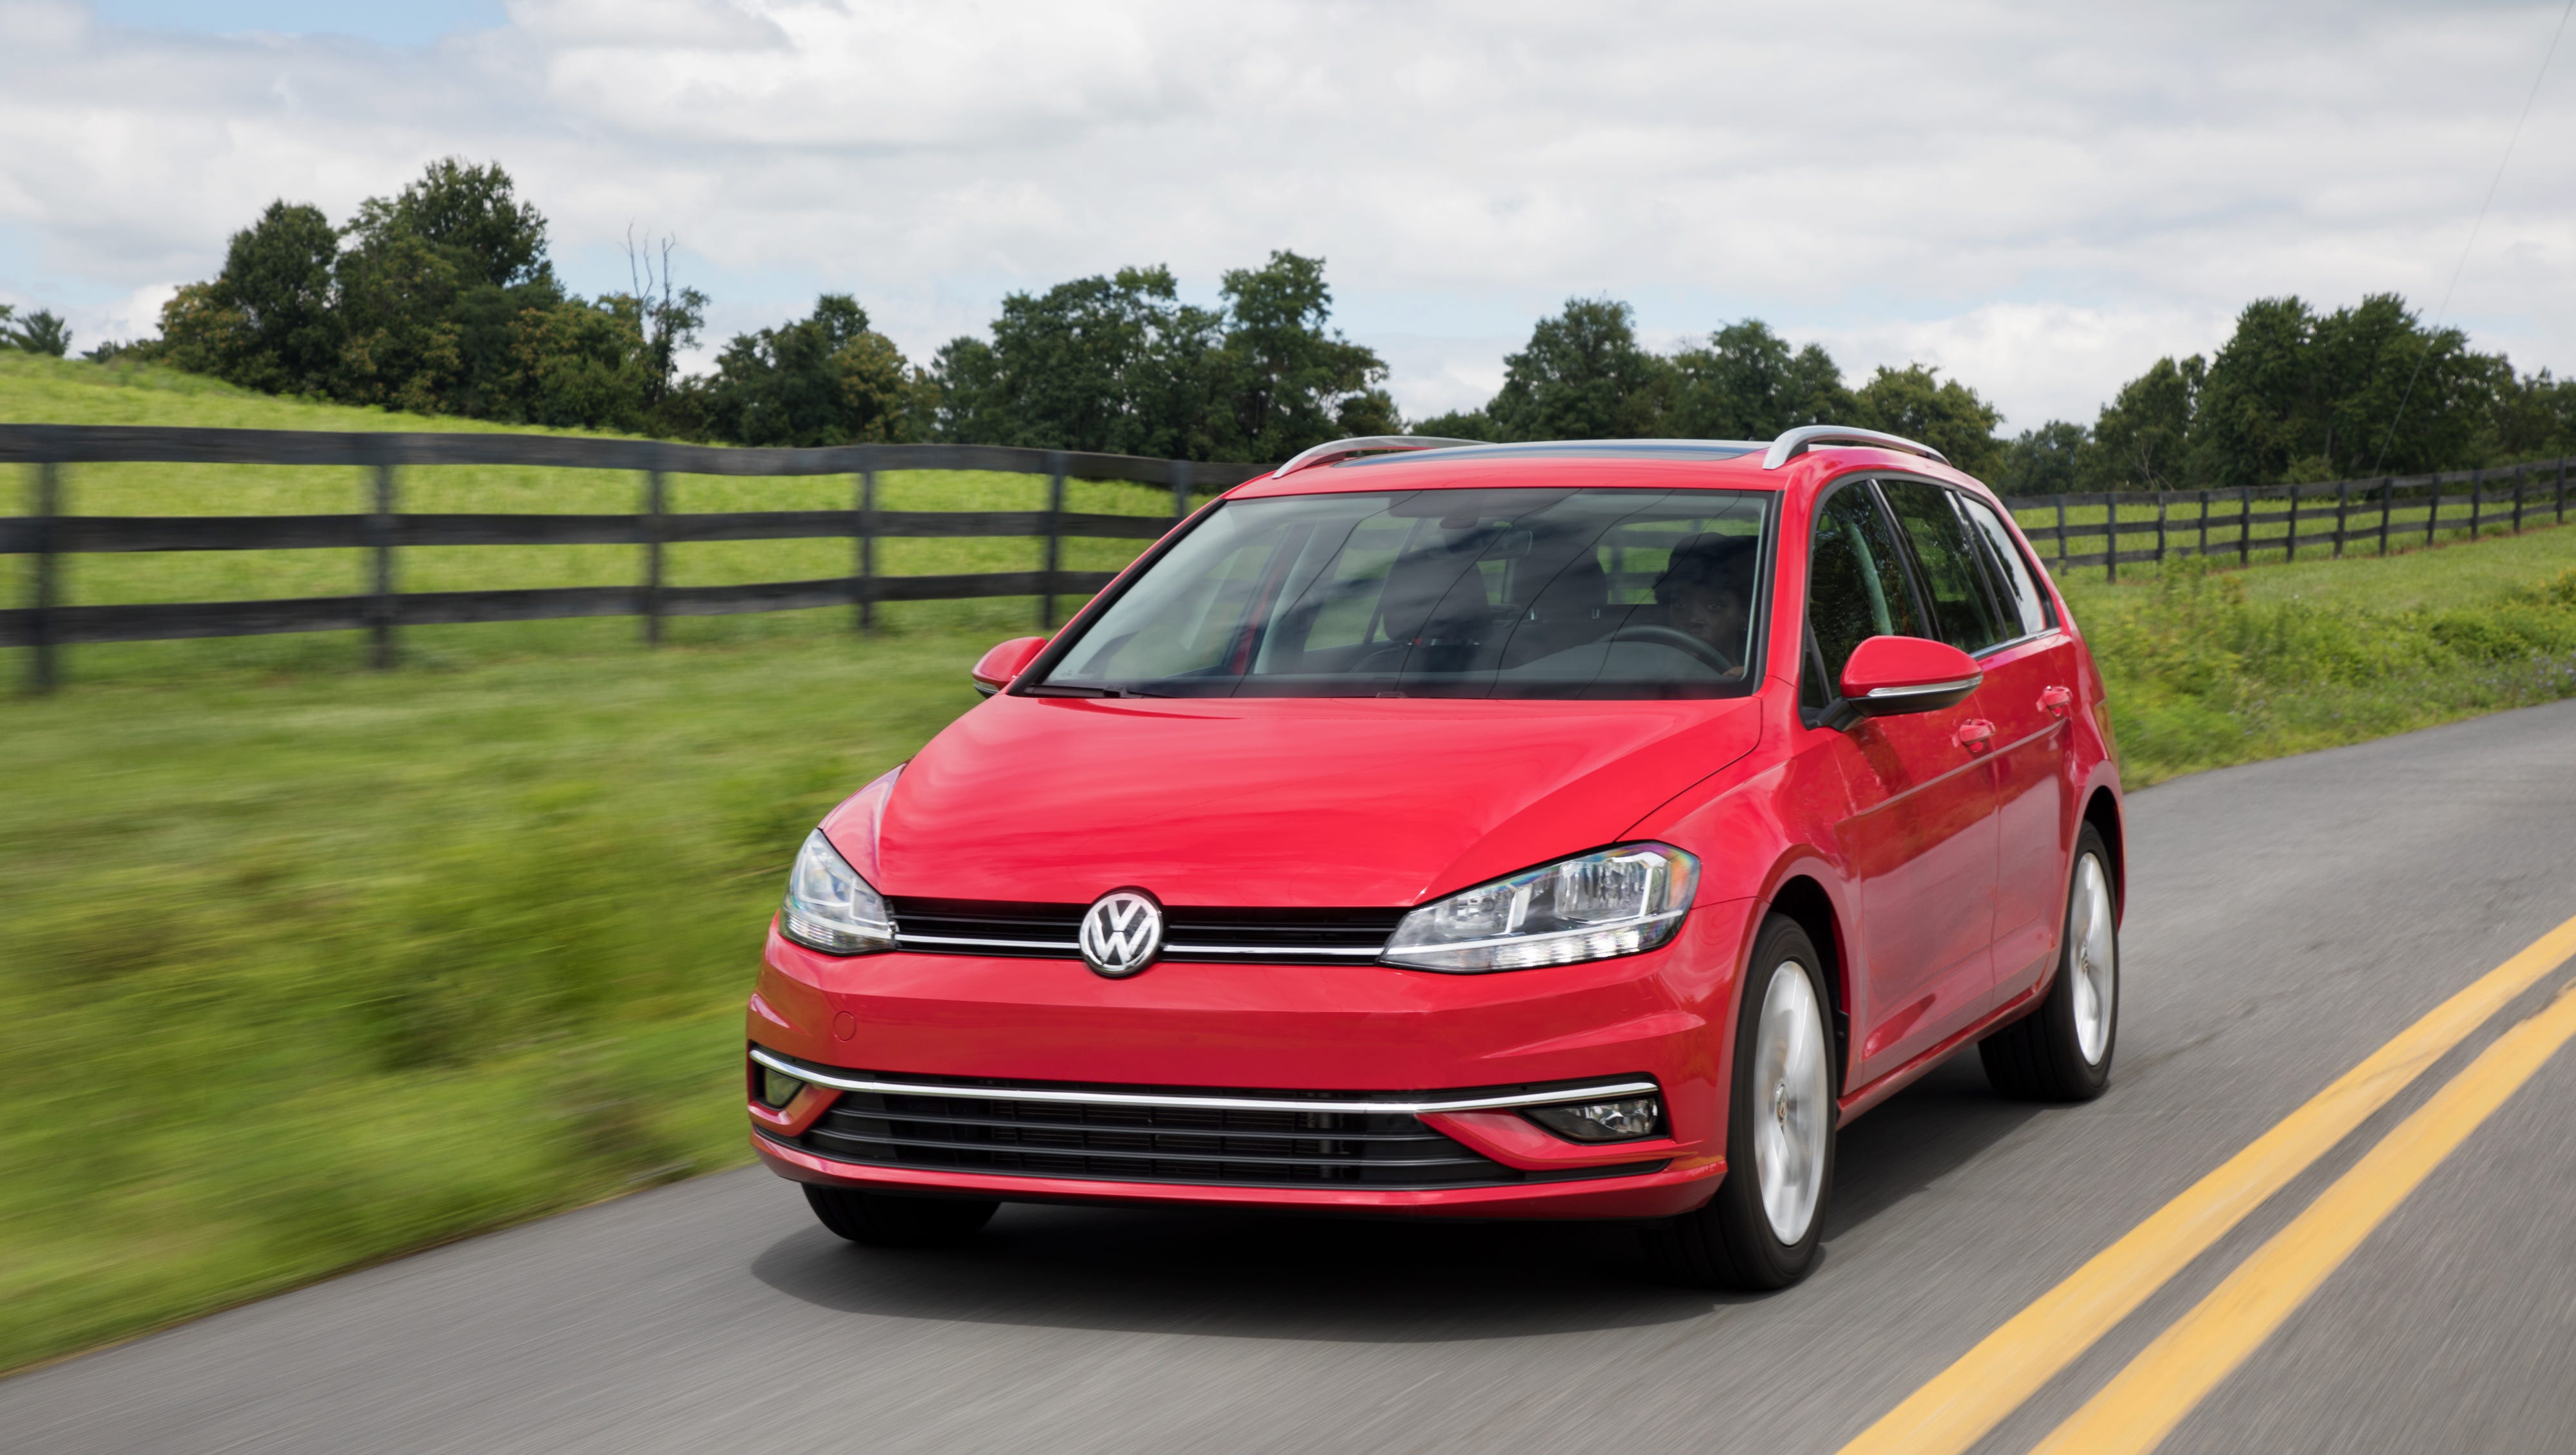 Volkswagen's Golf SportWagen is fun to drive -- for a wagon